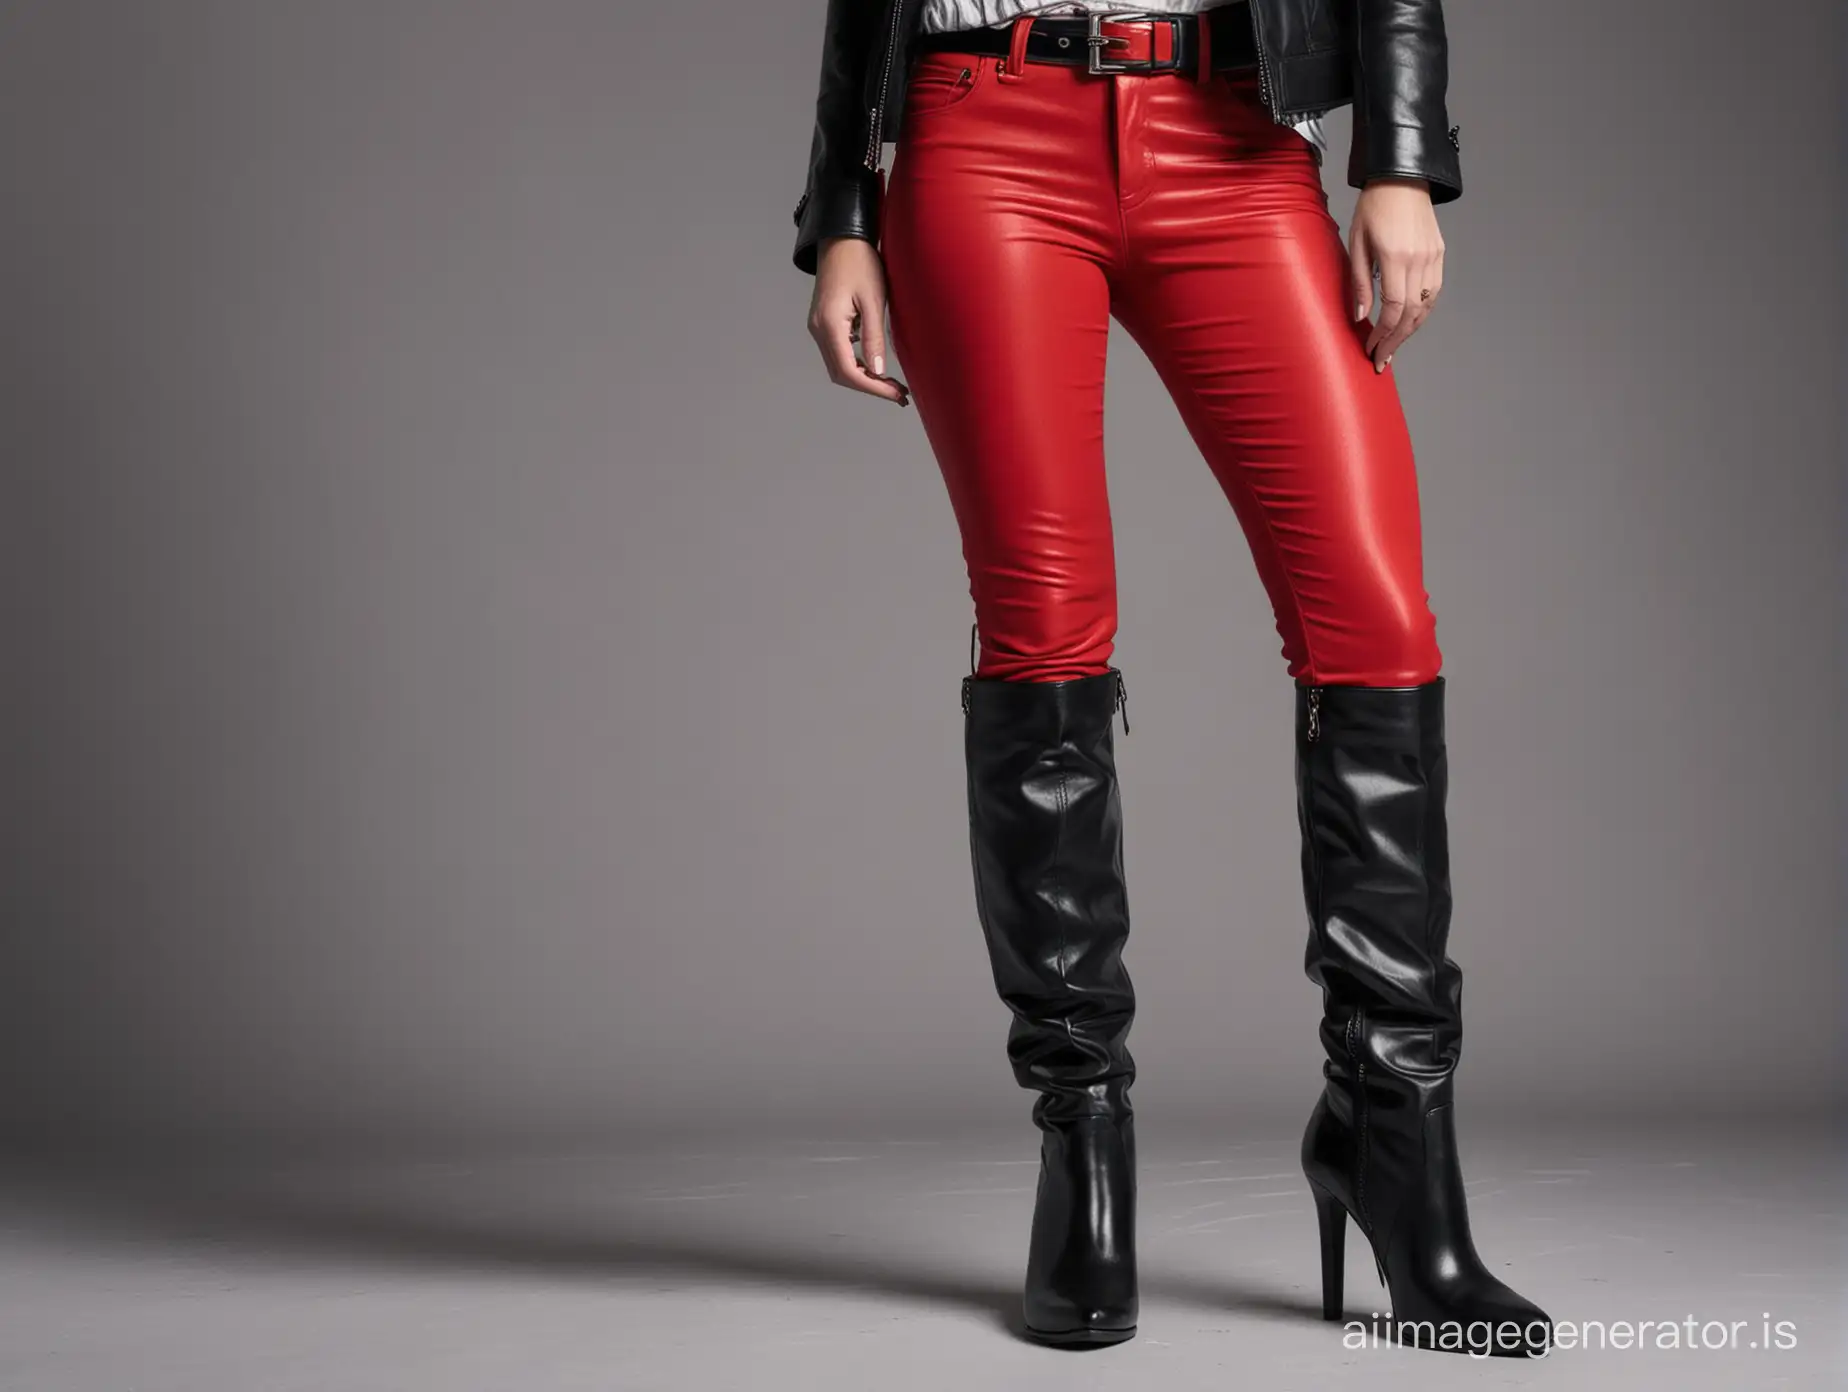 Fashionable-Woman-in-Red-Textile-Pants-and-KneeHigh-Boots